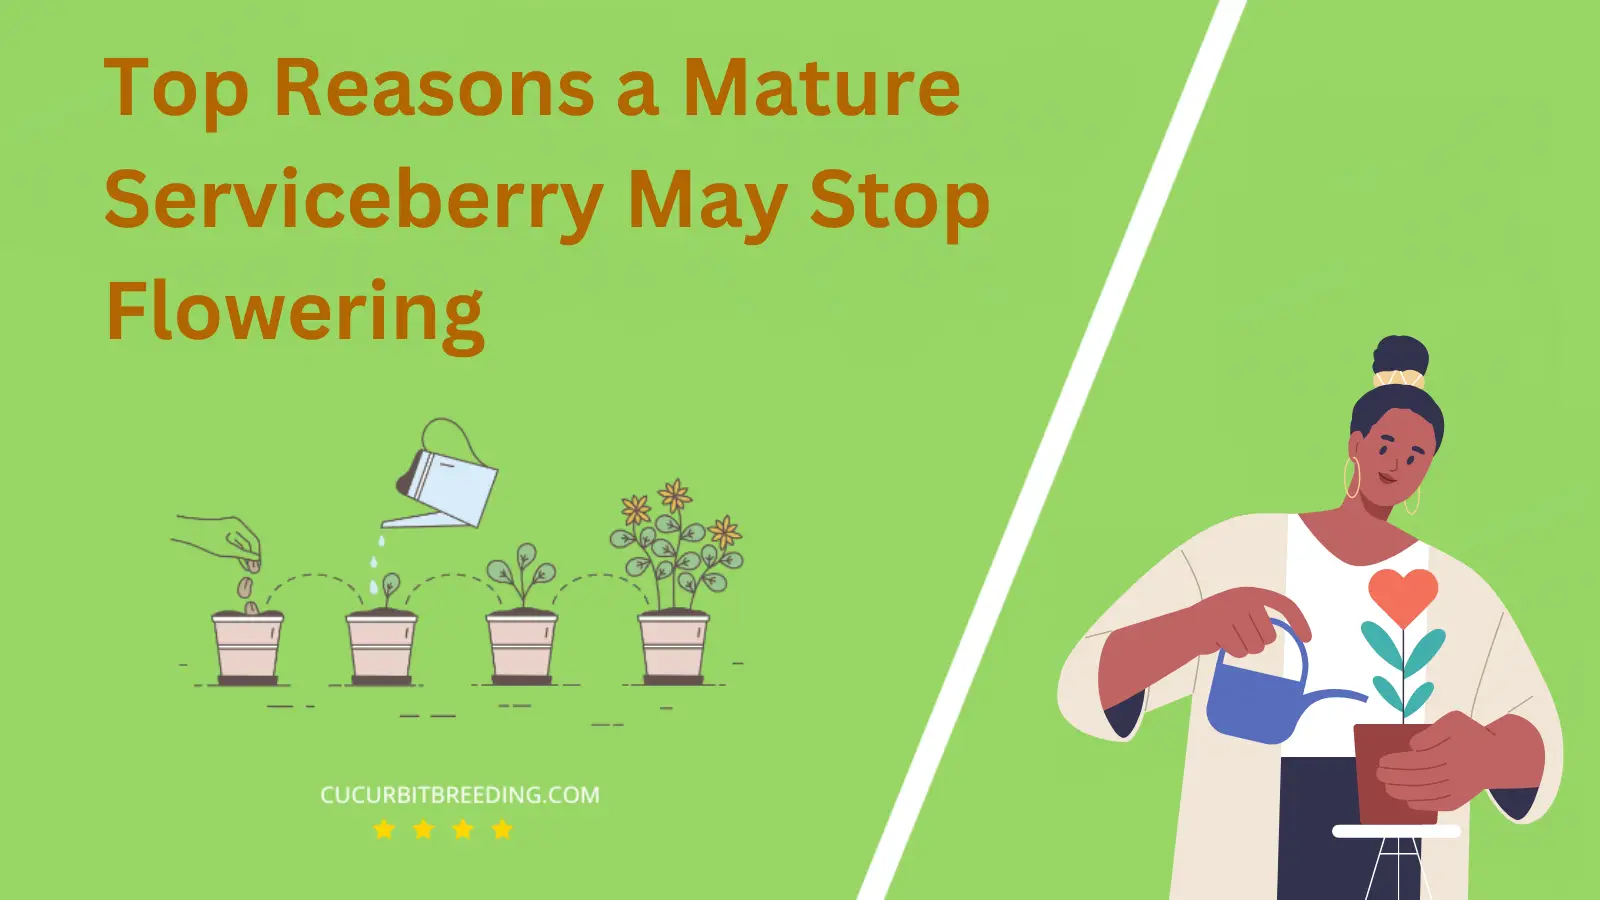 Top Reasons a Mature Serviceberry May Stop Flowering